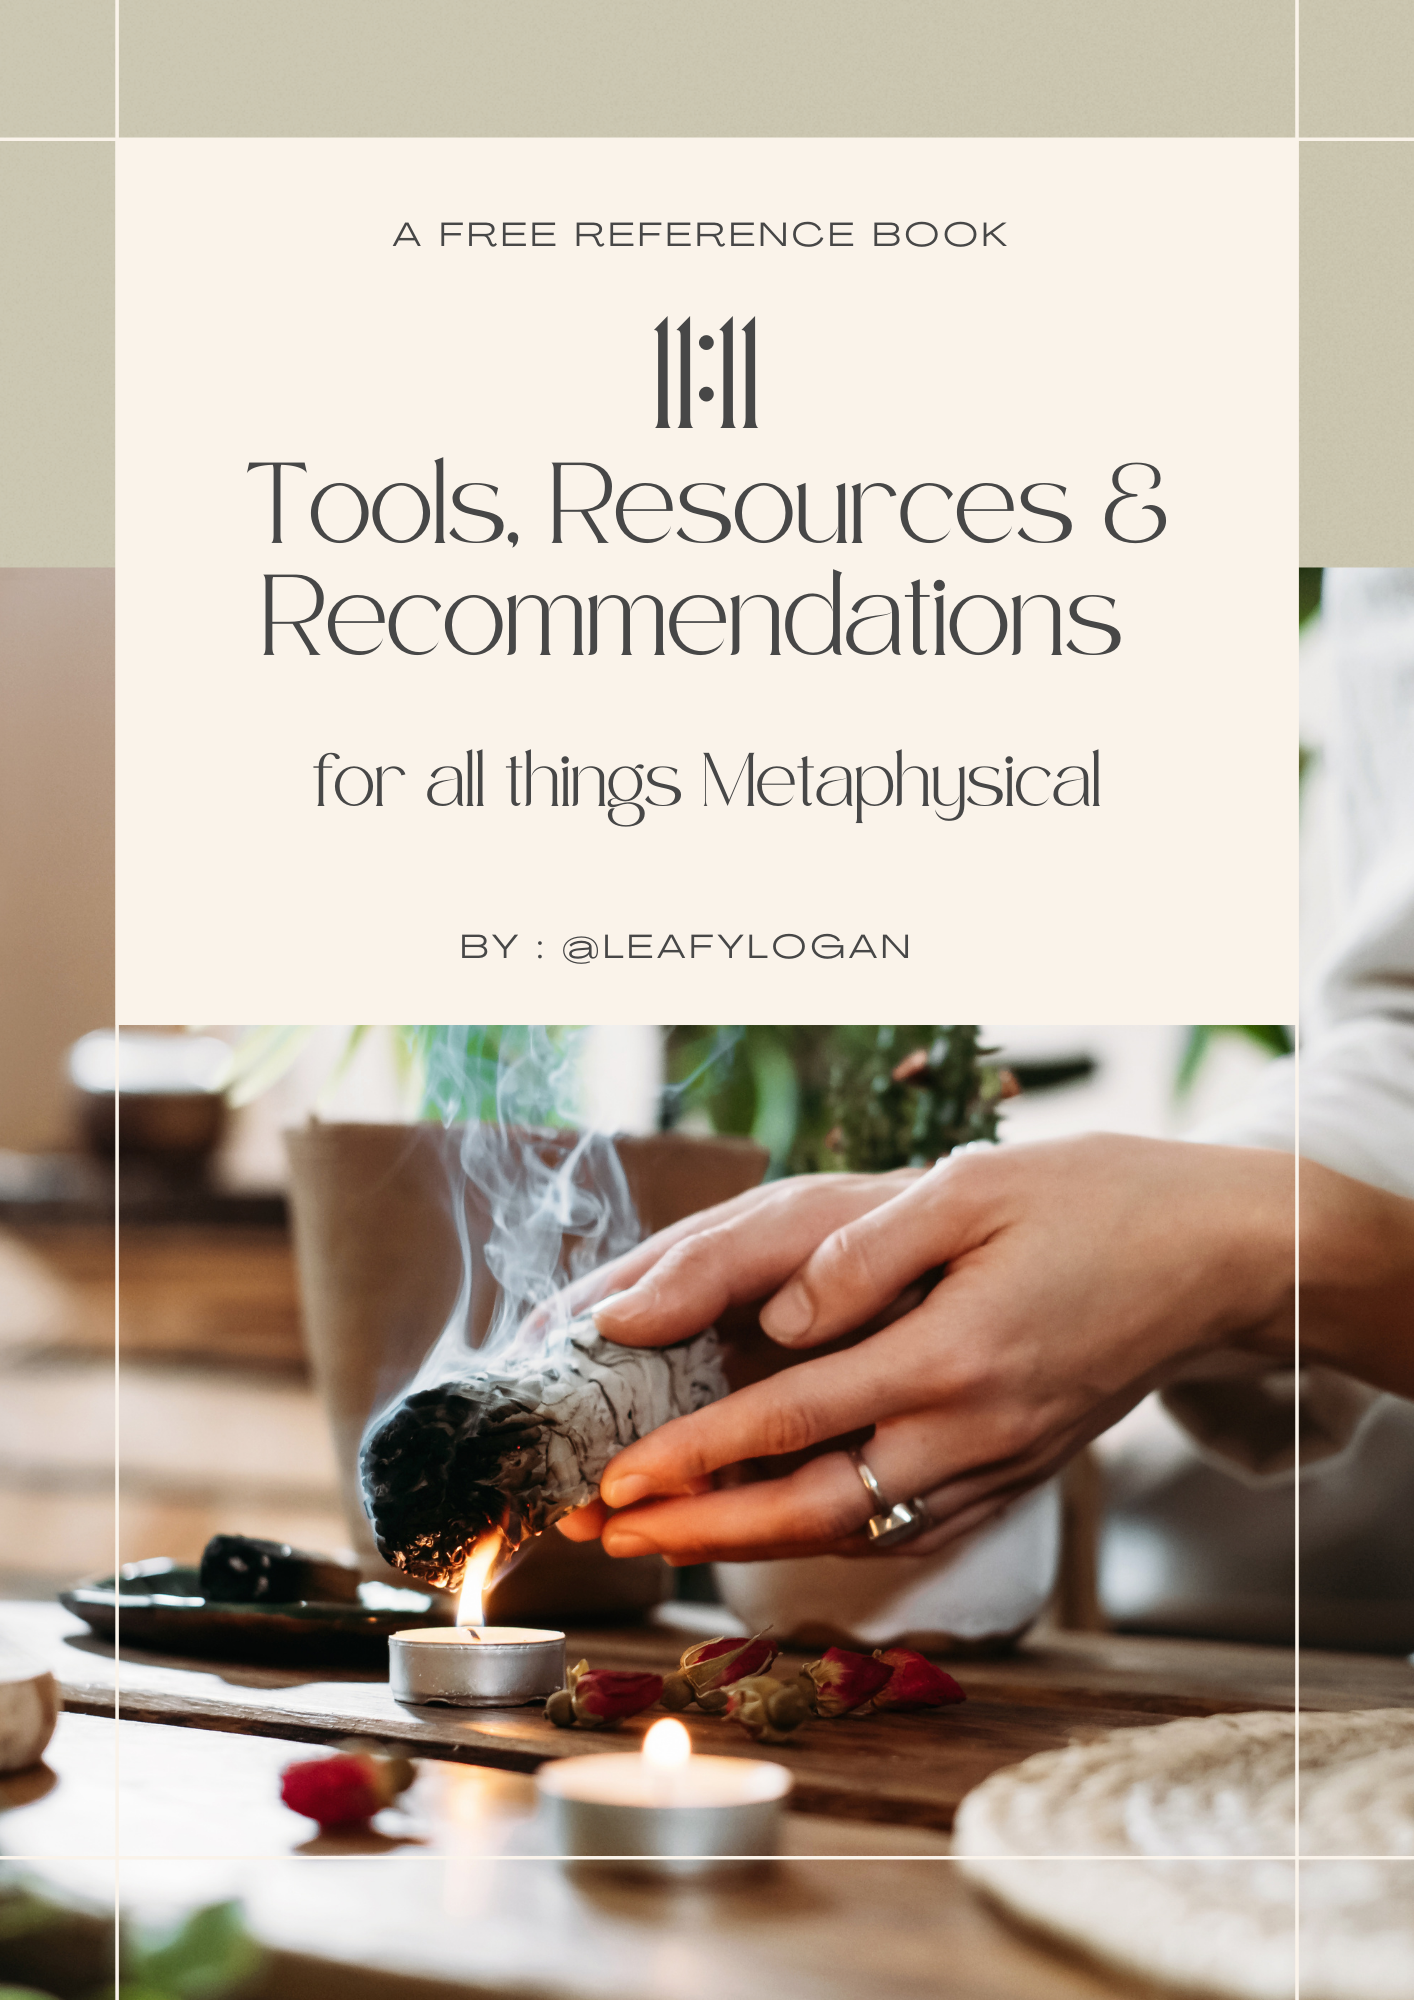 11:11 Tools, Resources & Recommendations